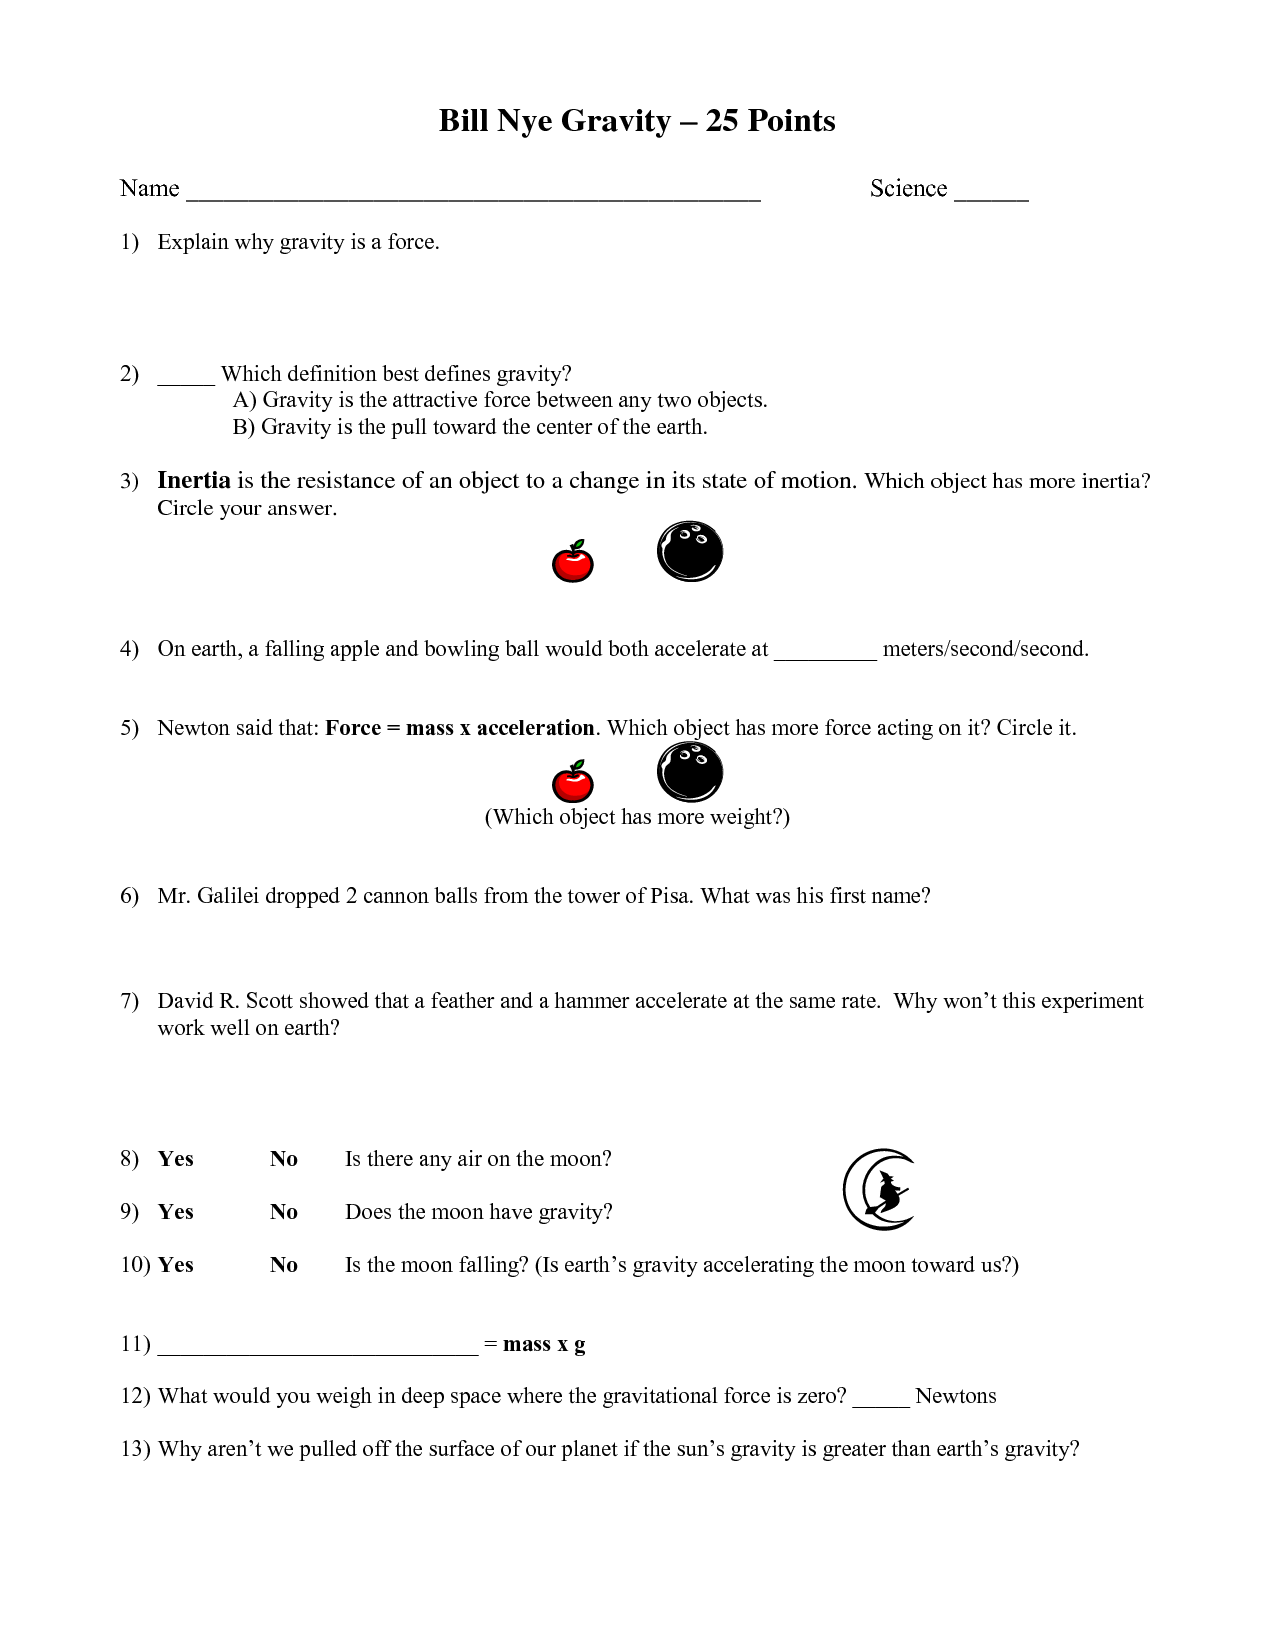 Bill Nye and Gravity Worksheet Answers